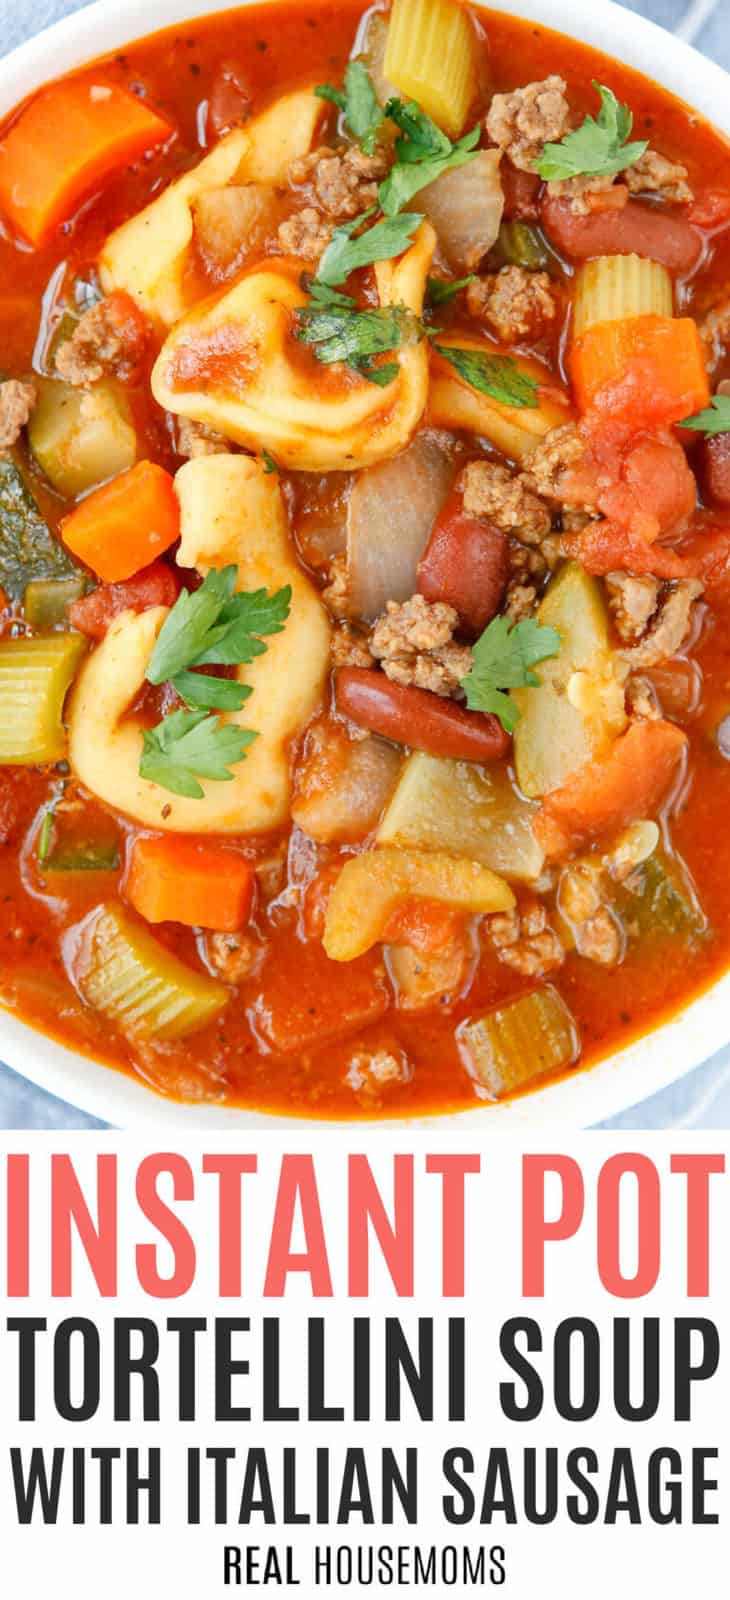 Instant Pot Tortellini Soup with Italian Sausage ⋆ Real Housemoms